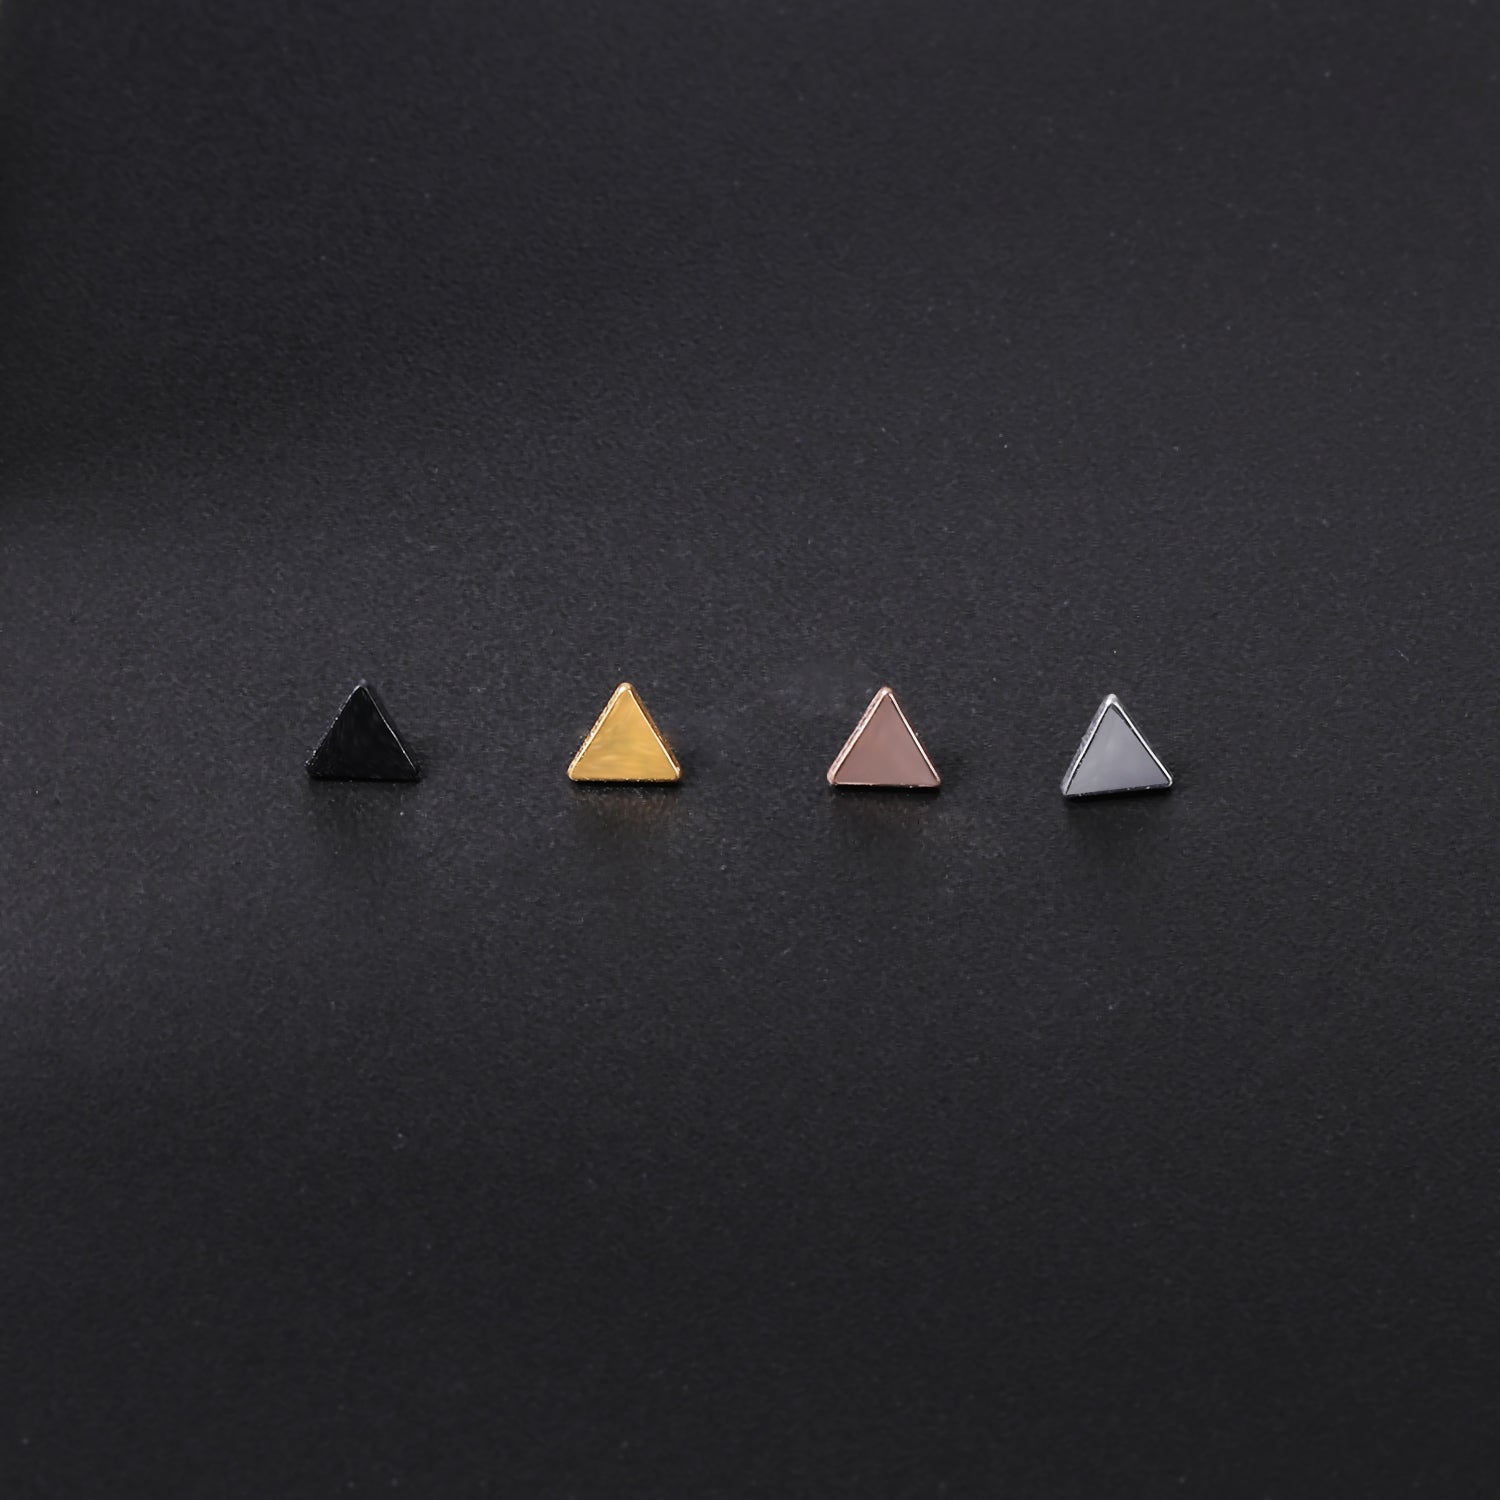 4pcs Triangle Dermal Anchor Tops Surgical Steel Internally Threaded Skin Diver Piercings